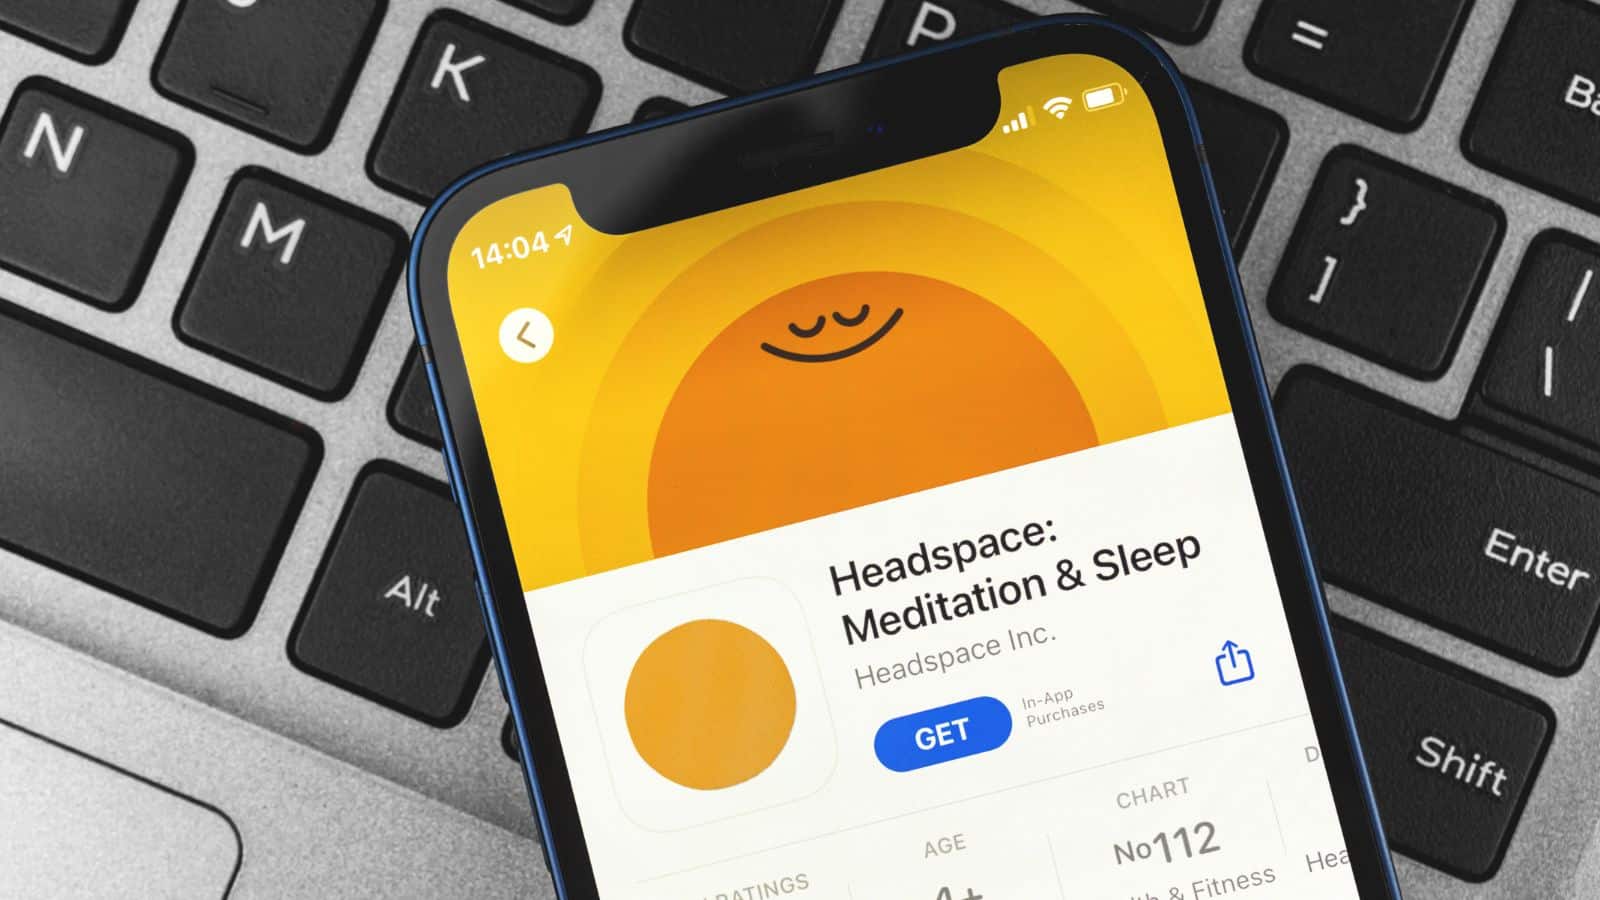 <p><a href="https://www.headspace.com/" rel="noopener external noreferrer">Headspace</a>offers multiple mindfulness and meditation exercises. It acts as a personal guide, steering users towards a healthier, happier, and more mindful life. By mastering the art of mindfulness and meditation with Headspace, users can effectively manage stress, improve focus, and enhance overall mental well-being.</p>